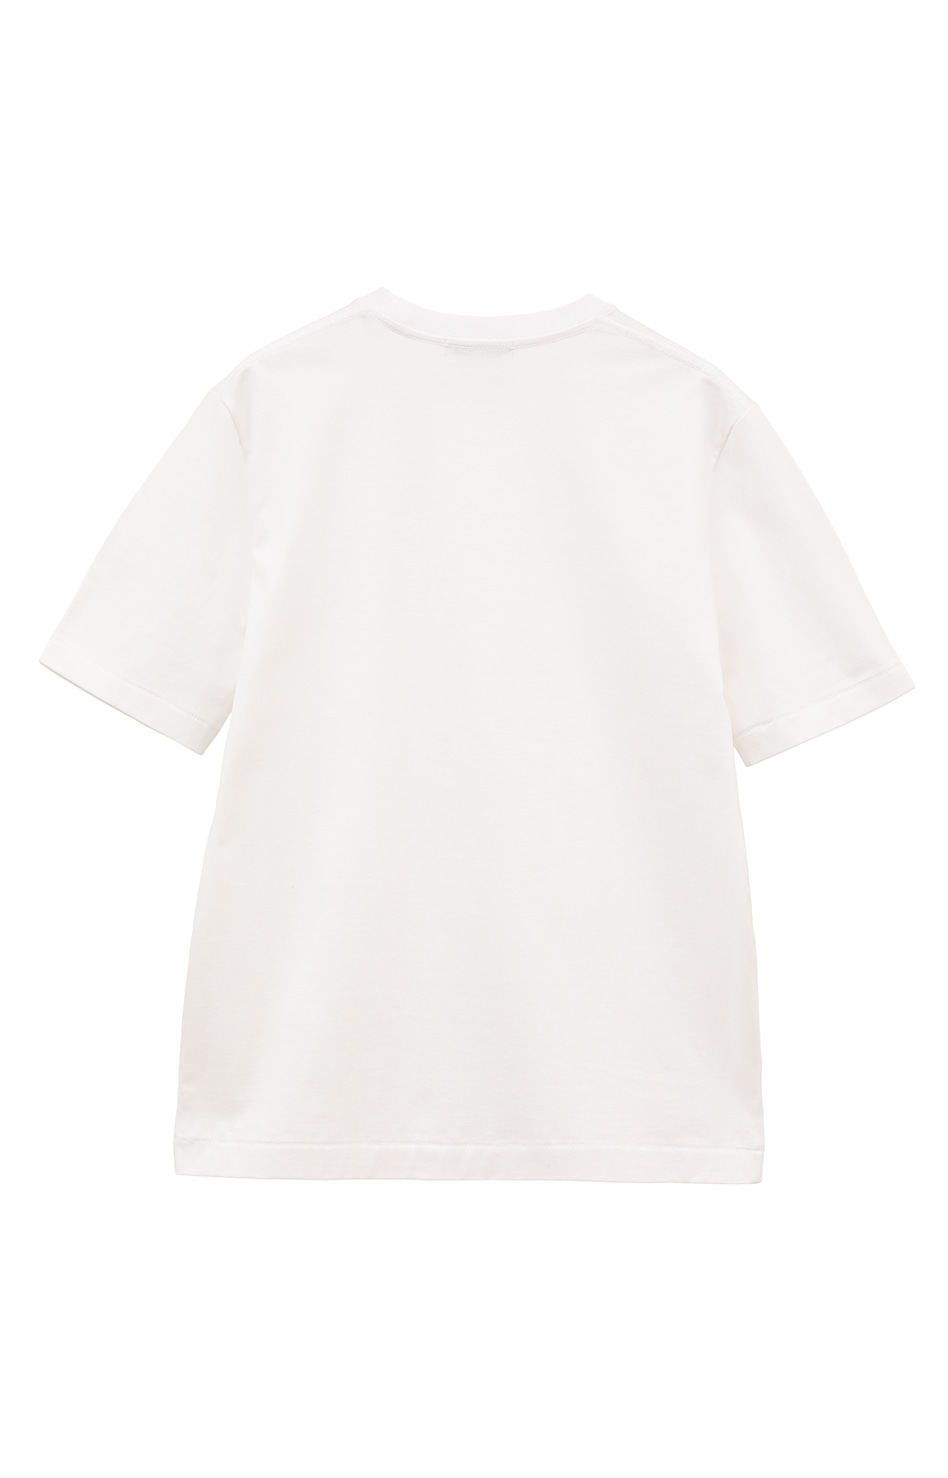 NEW BASIC TEE｜TOPS(トップス)｜CLANE OFFICIAL ONLINE STORE